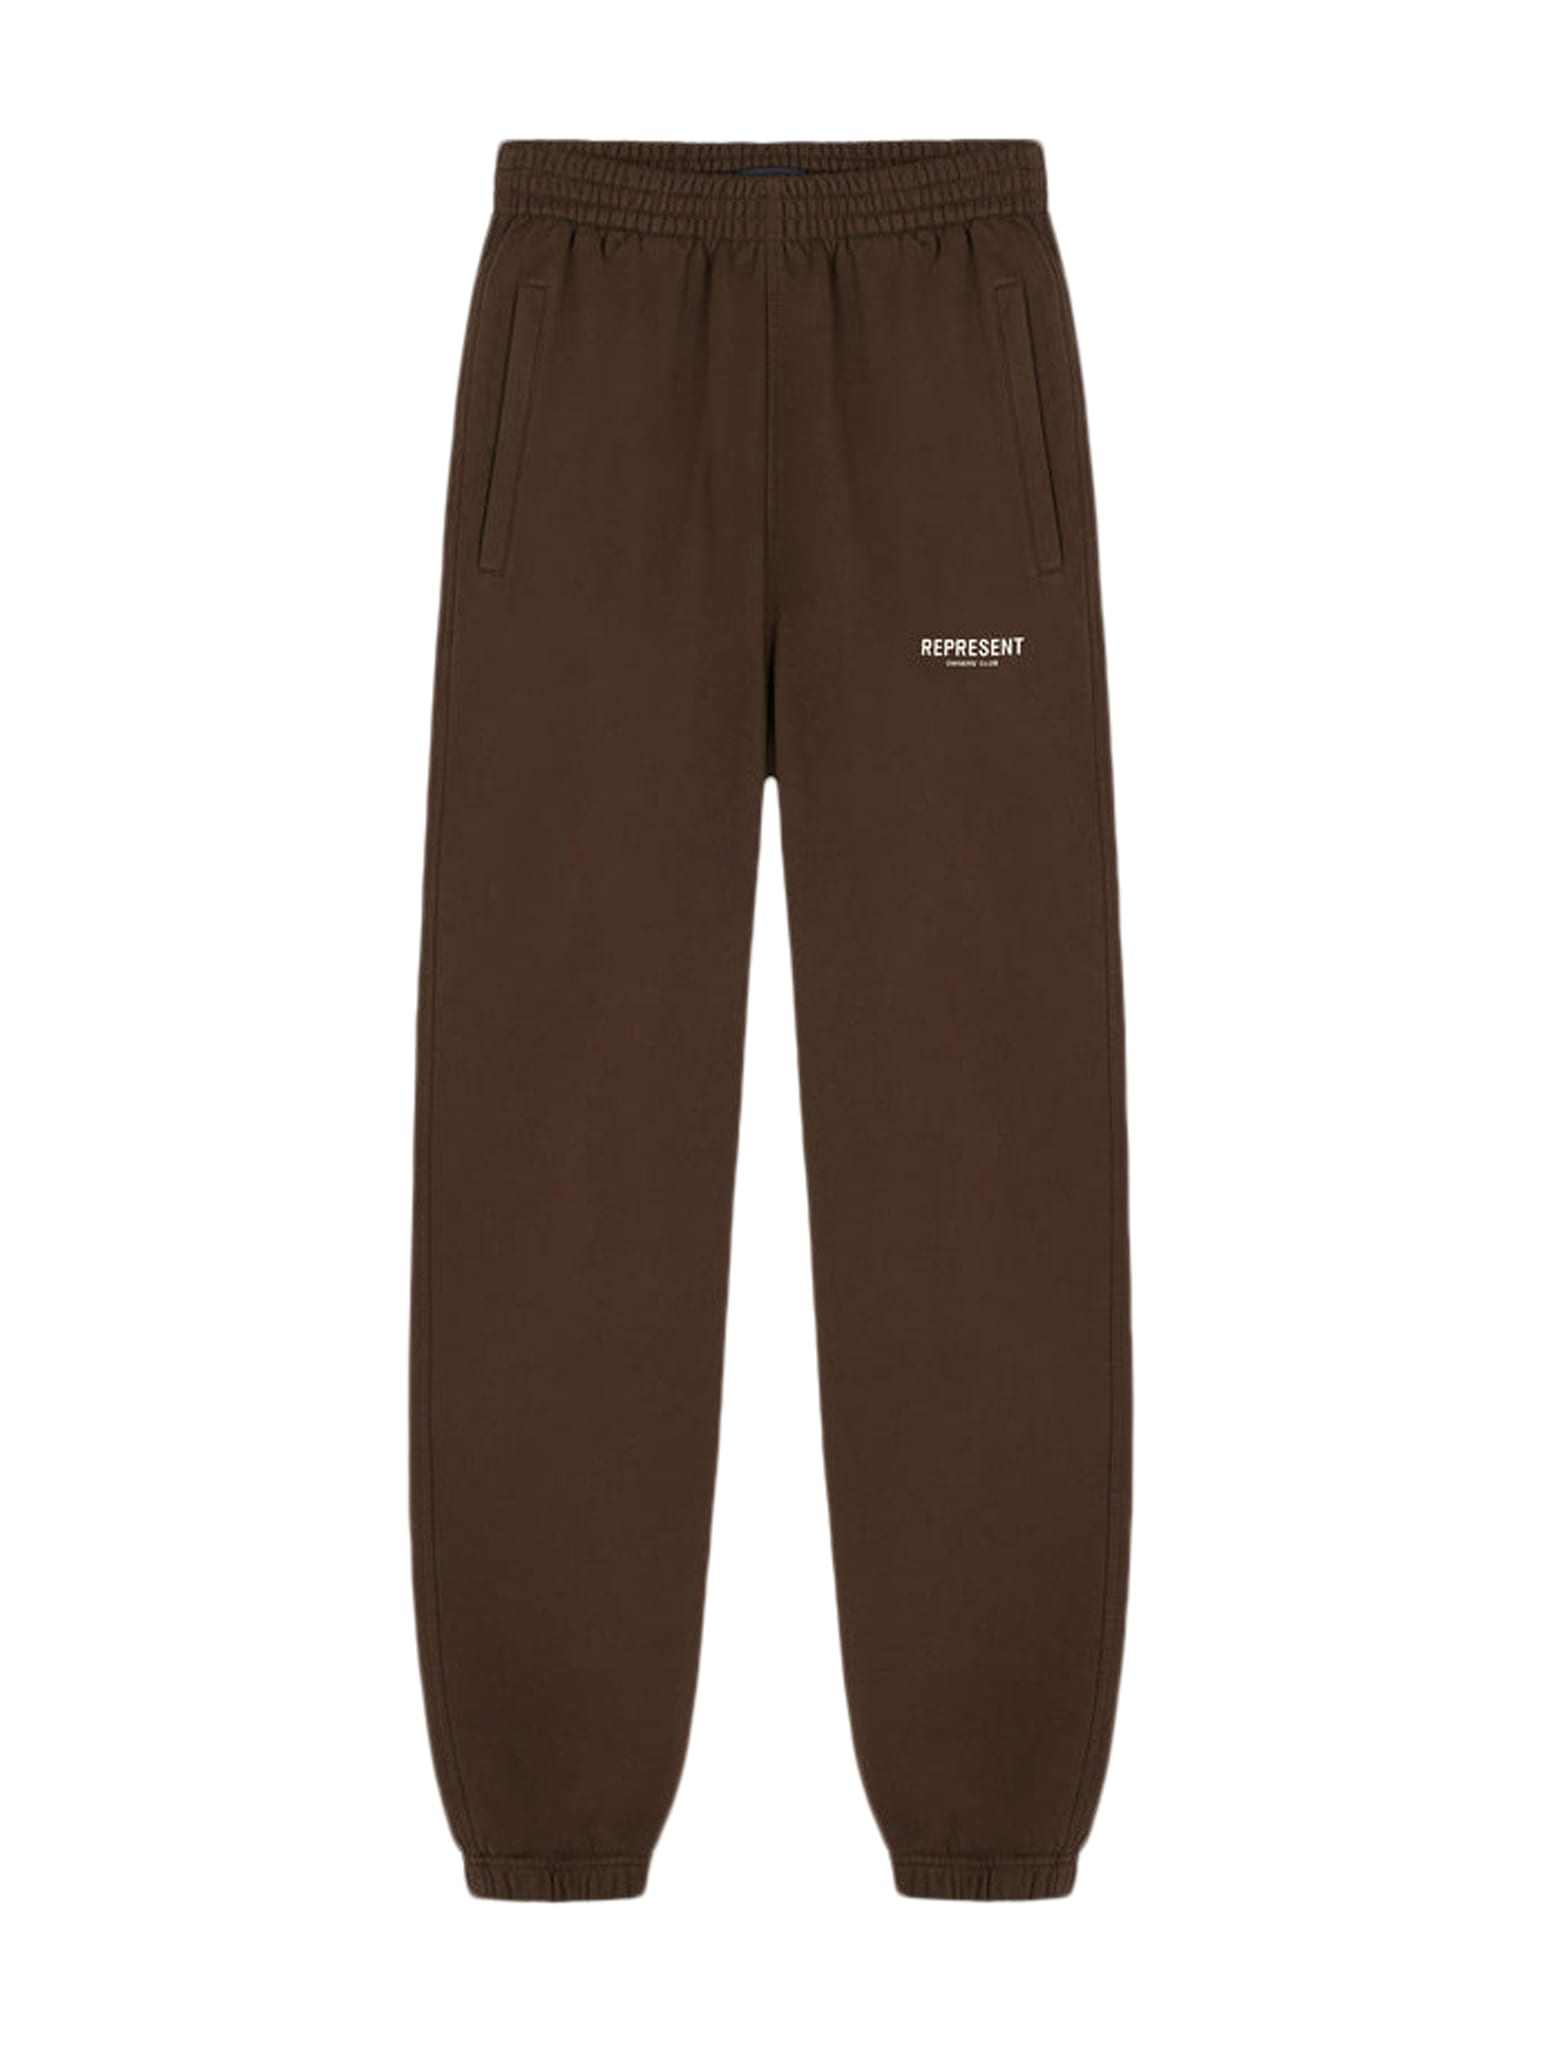 REPRESENT Owners Clubrelaxed Fit Sweatpant